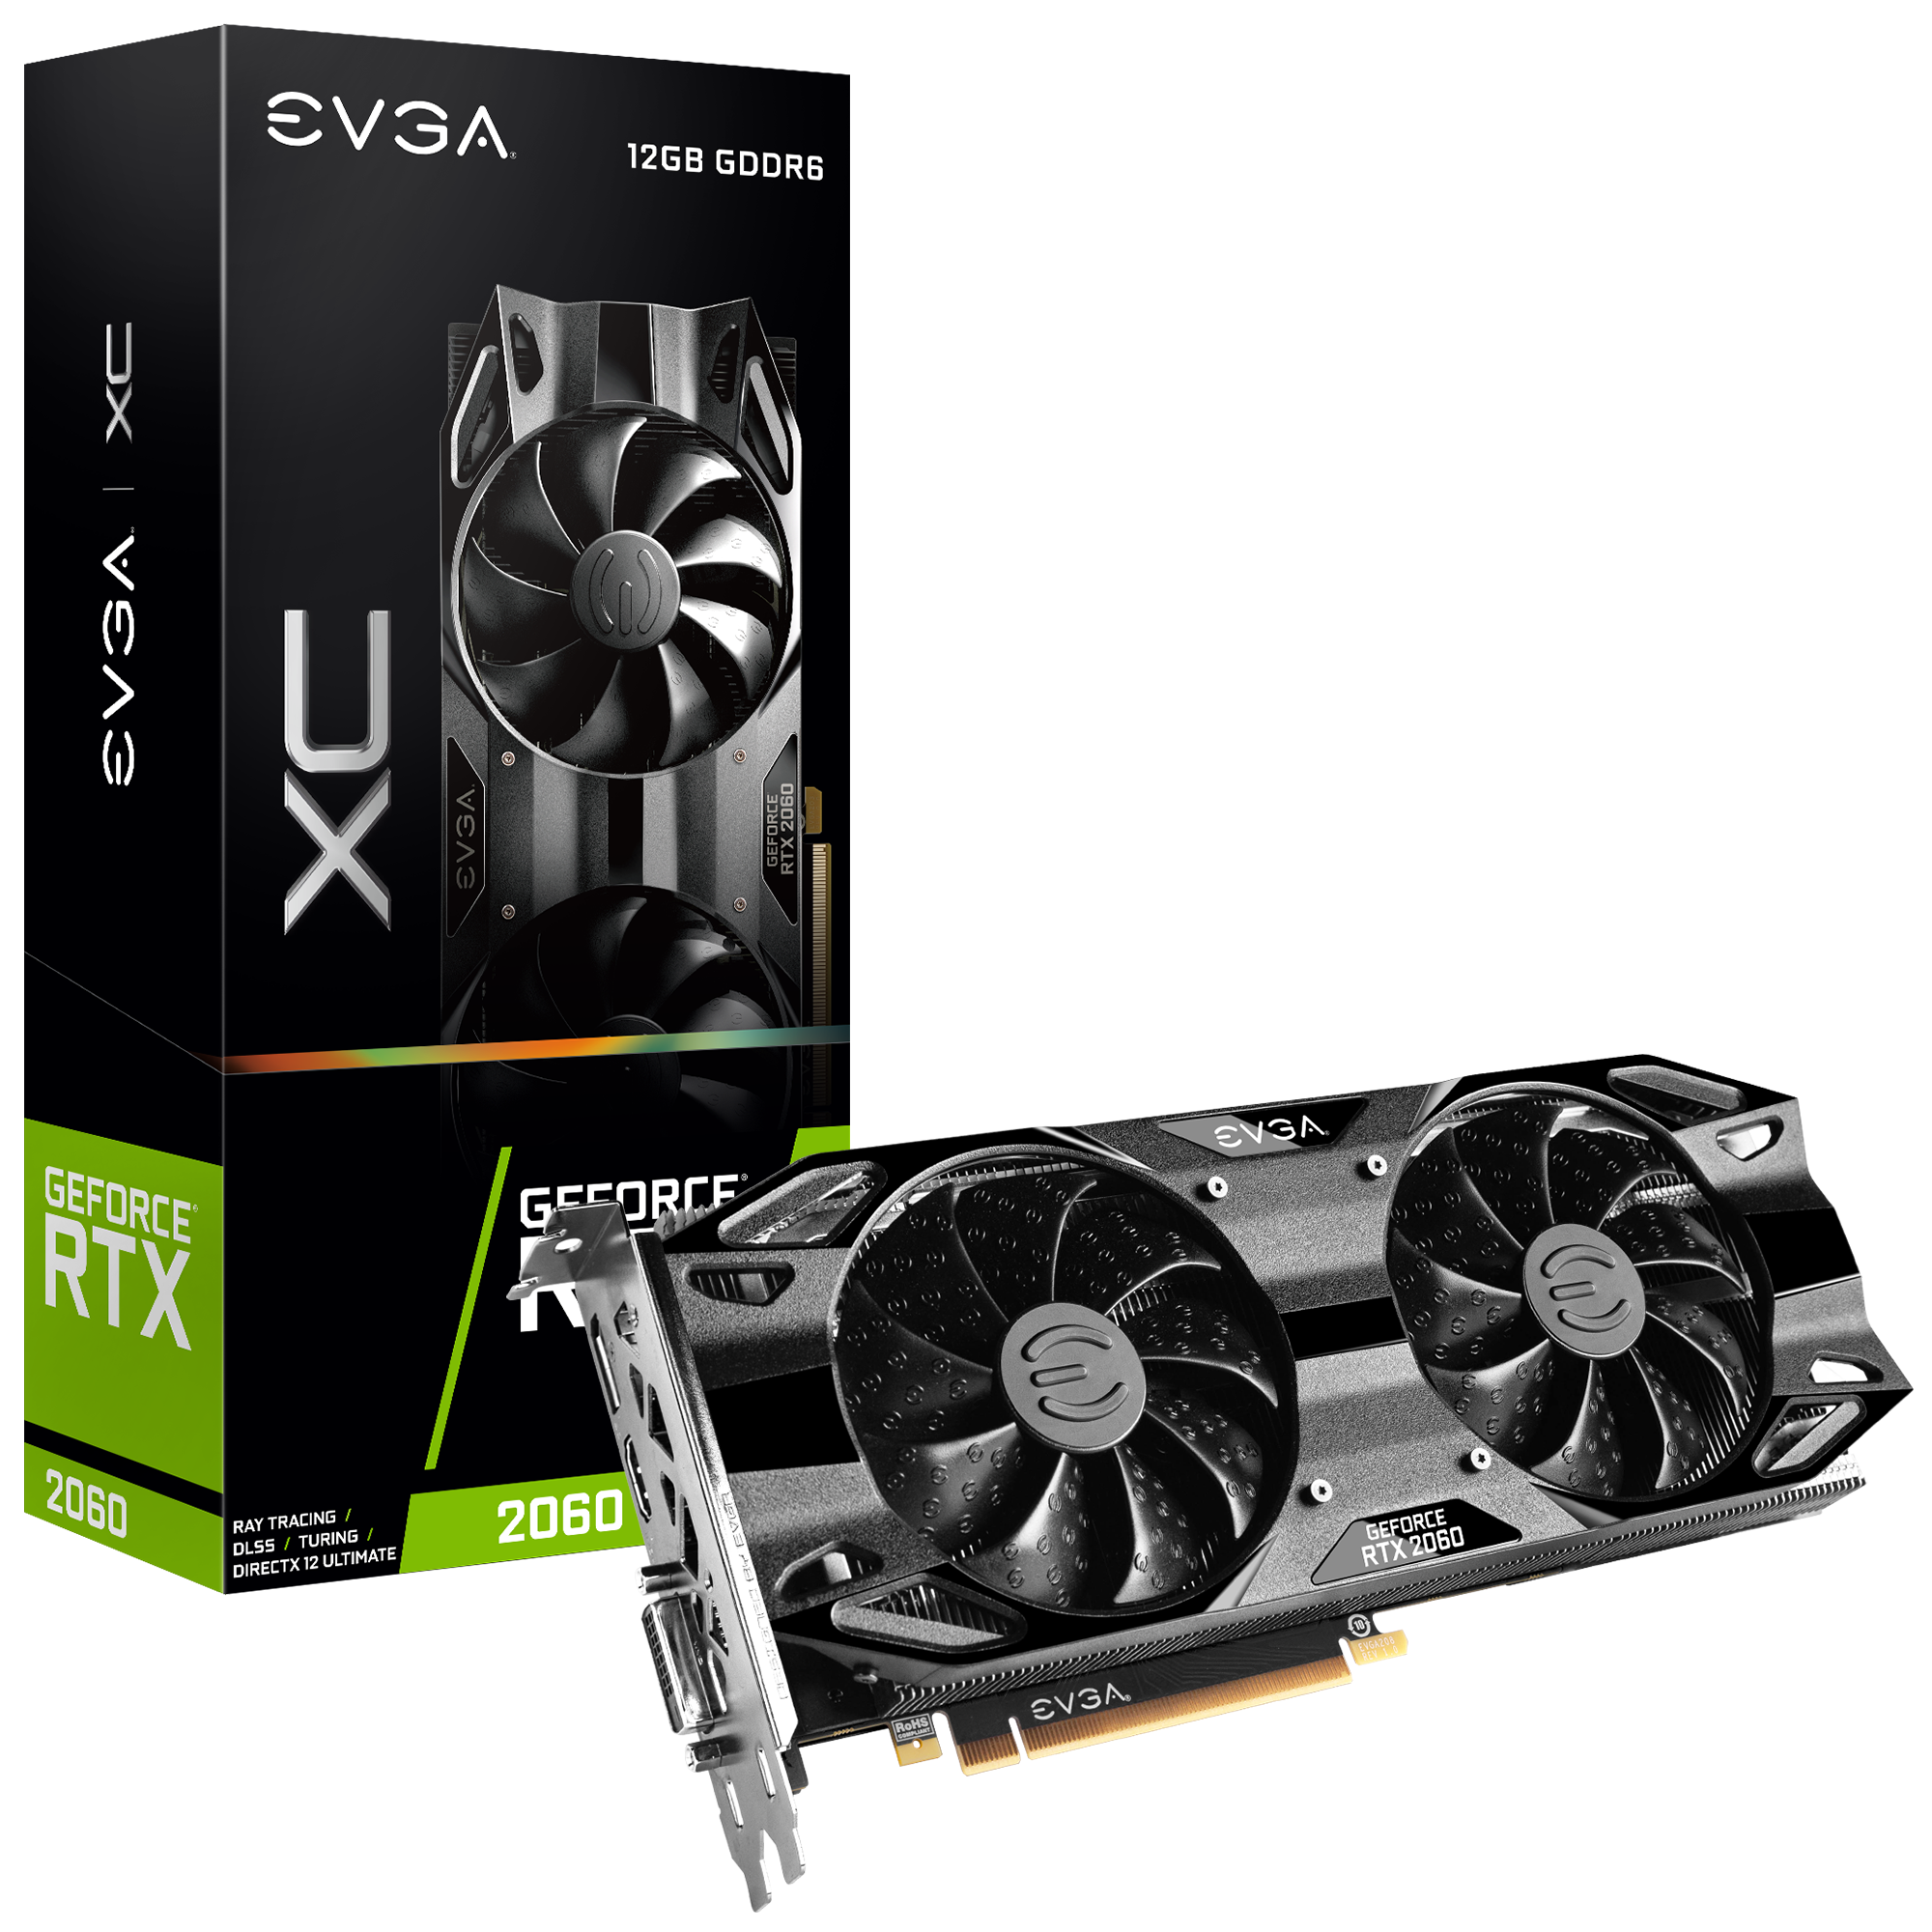 EVGA - Asia - Products - EVGA GeForce RTX 2060 12GB GAMING, 12G-P4-2263-KR, 12GB Dual Fans, Backplate 12G-P4-2263-KR